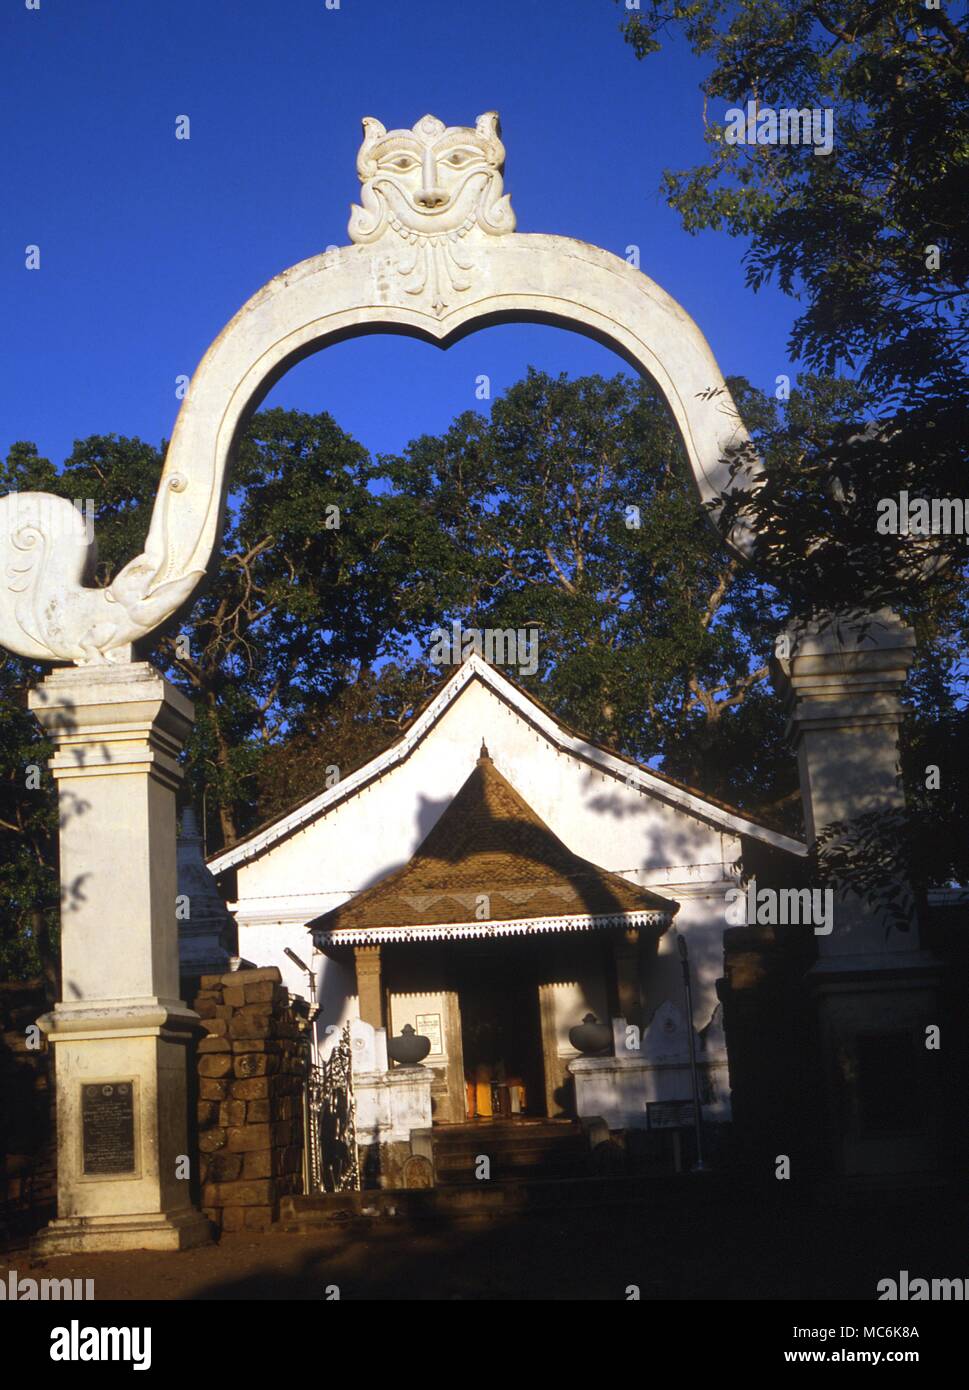 The Bodhi Tree planted from a cutting of the original Bodhi tree under which Buddha attained enlightenment Entrance to the sacred precinct with tree behind Sri Lanka Anuradhapura Stock Photo